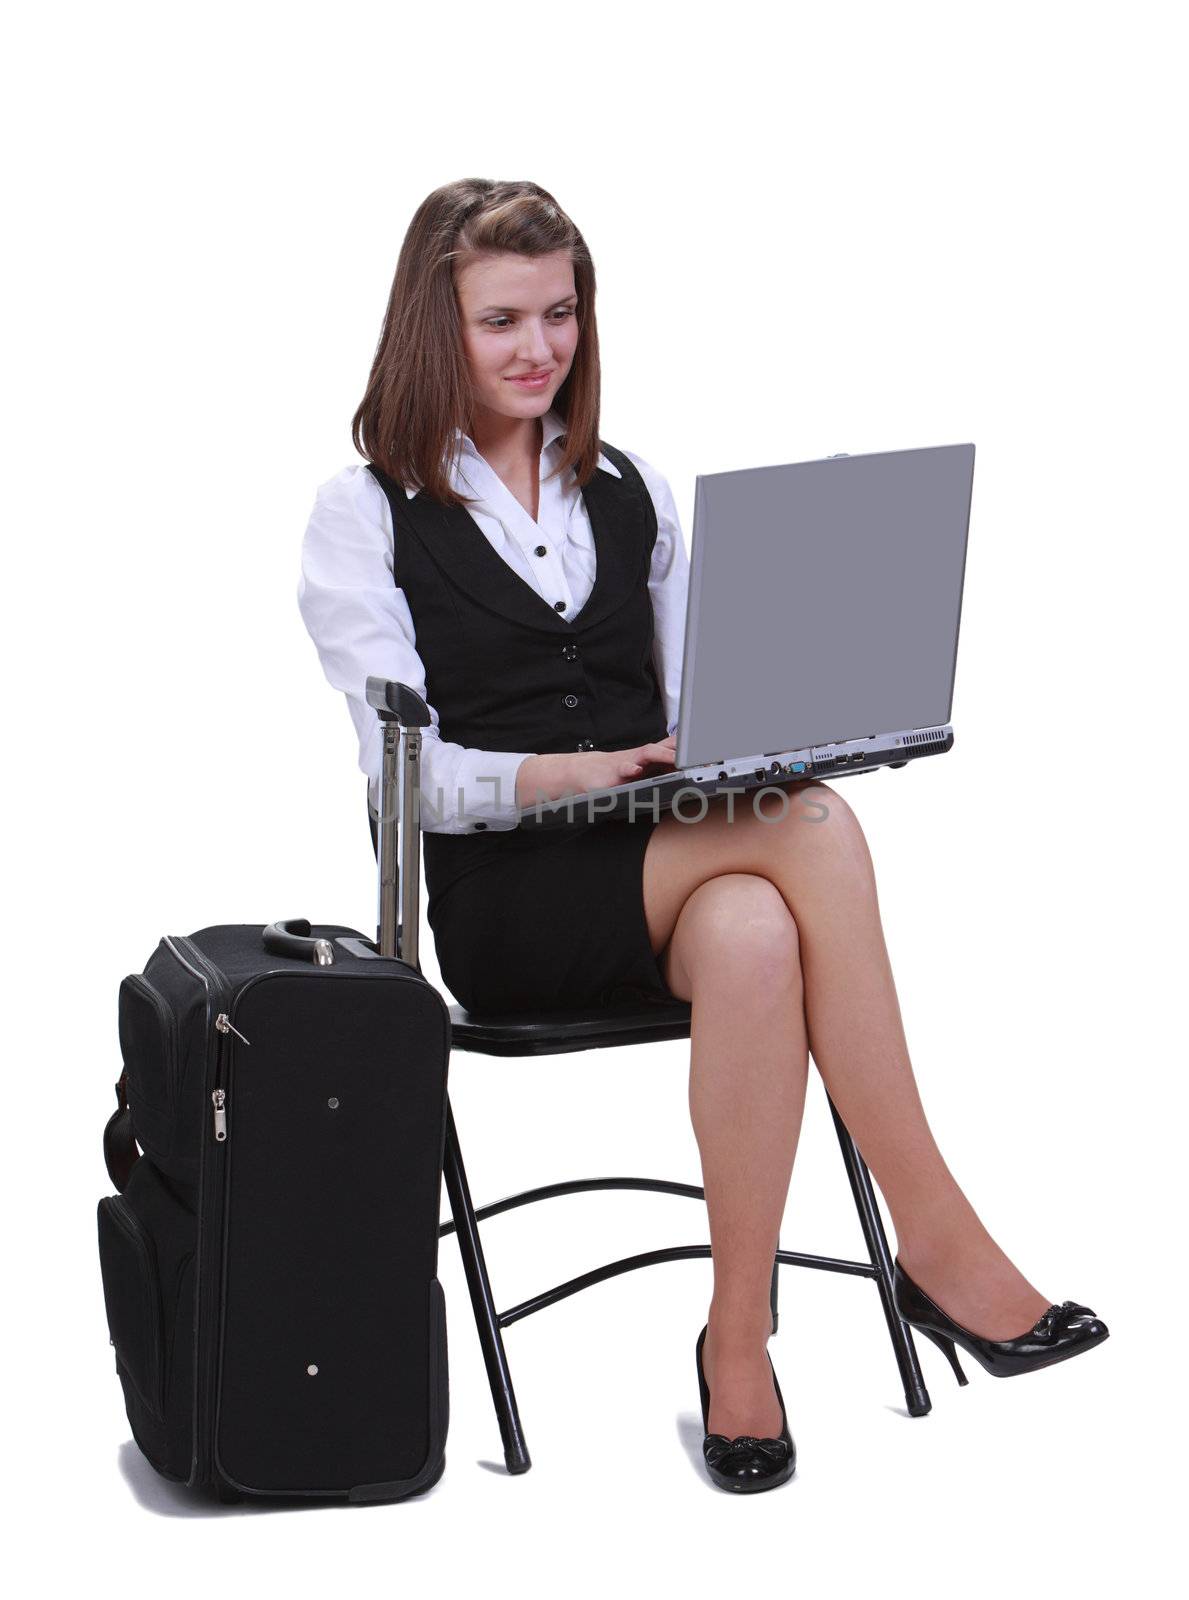 Young woman traveler working in a hurry on the latop next to her suitcase- isolated against a white background.